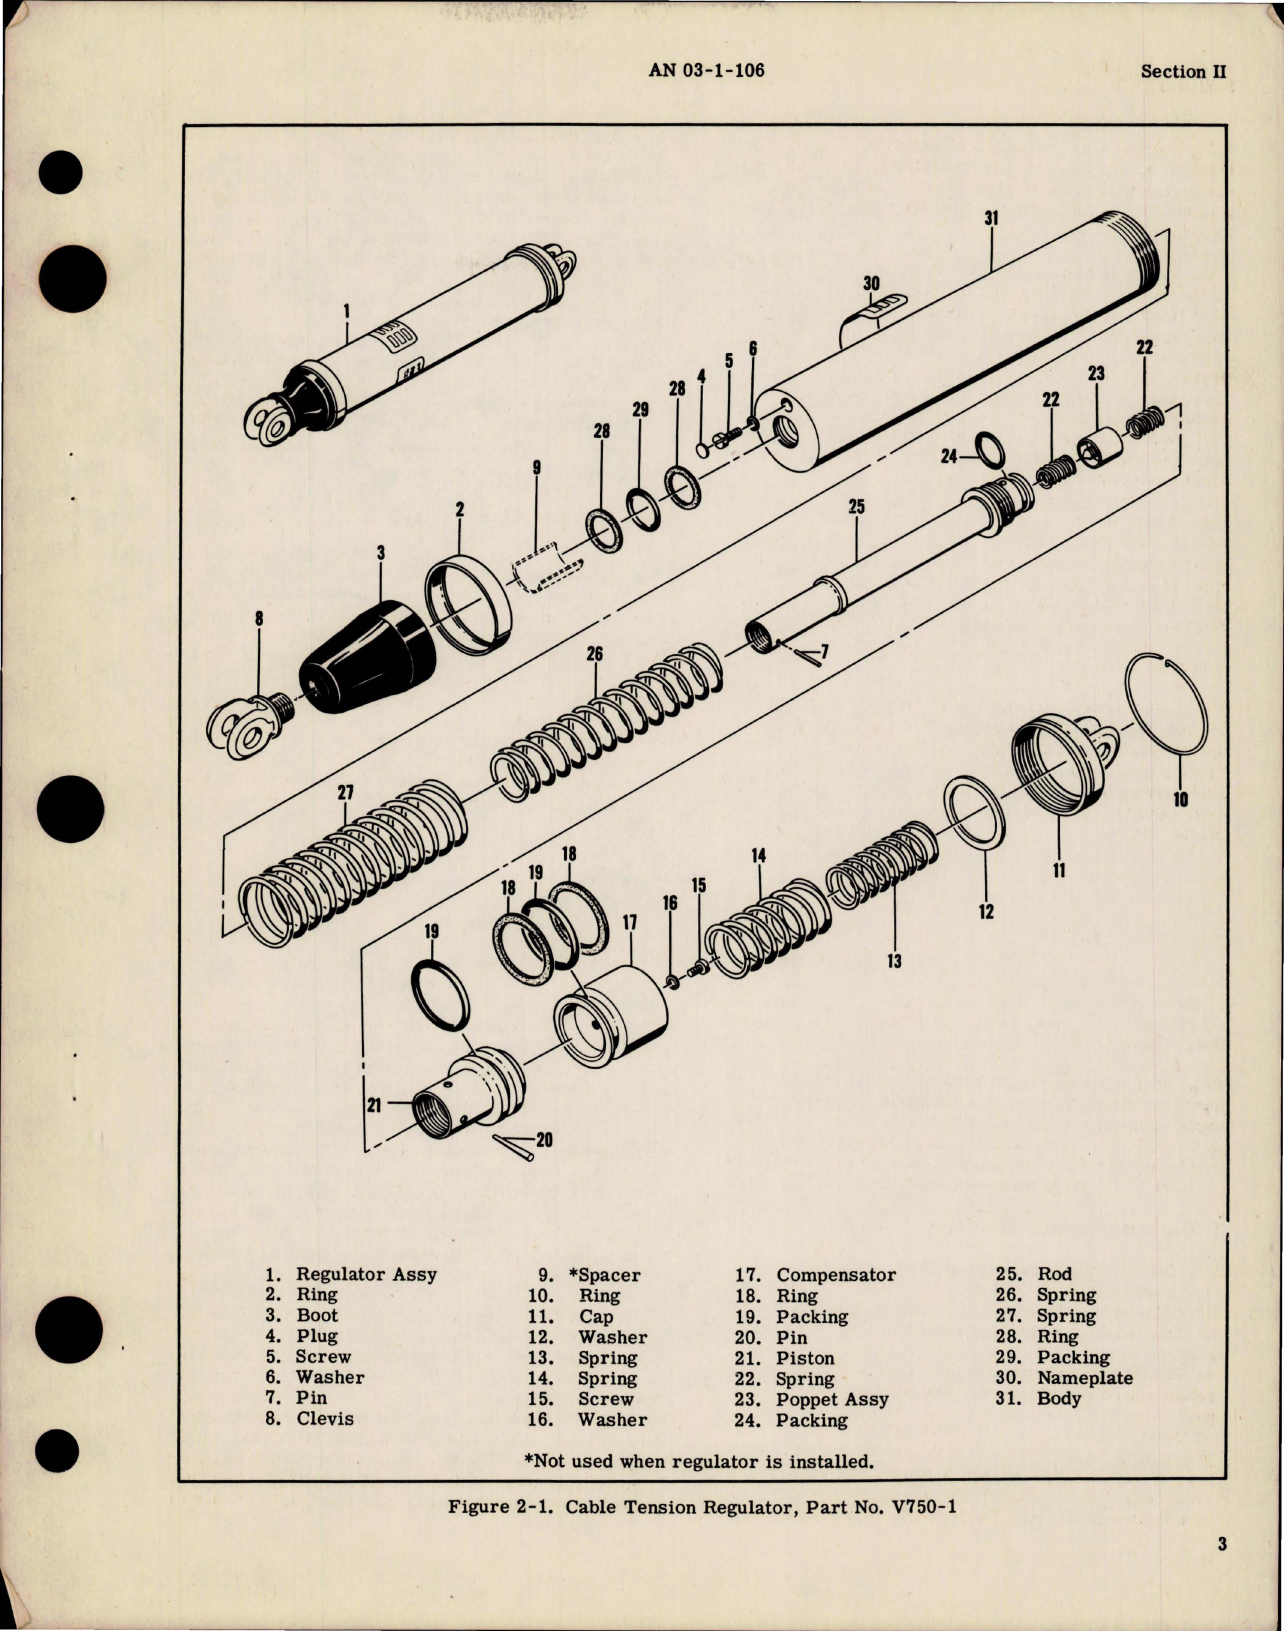 Sample page 5 from AirCorps Library document: Overhaul Instructions for Cable Tension Regulators - Parts V720-3, V720-8-1 and V750-1